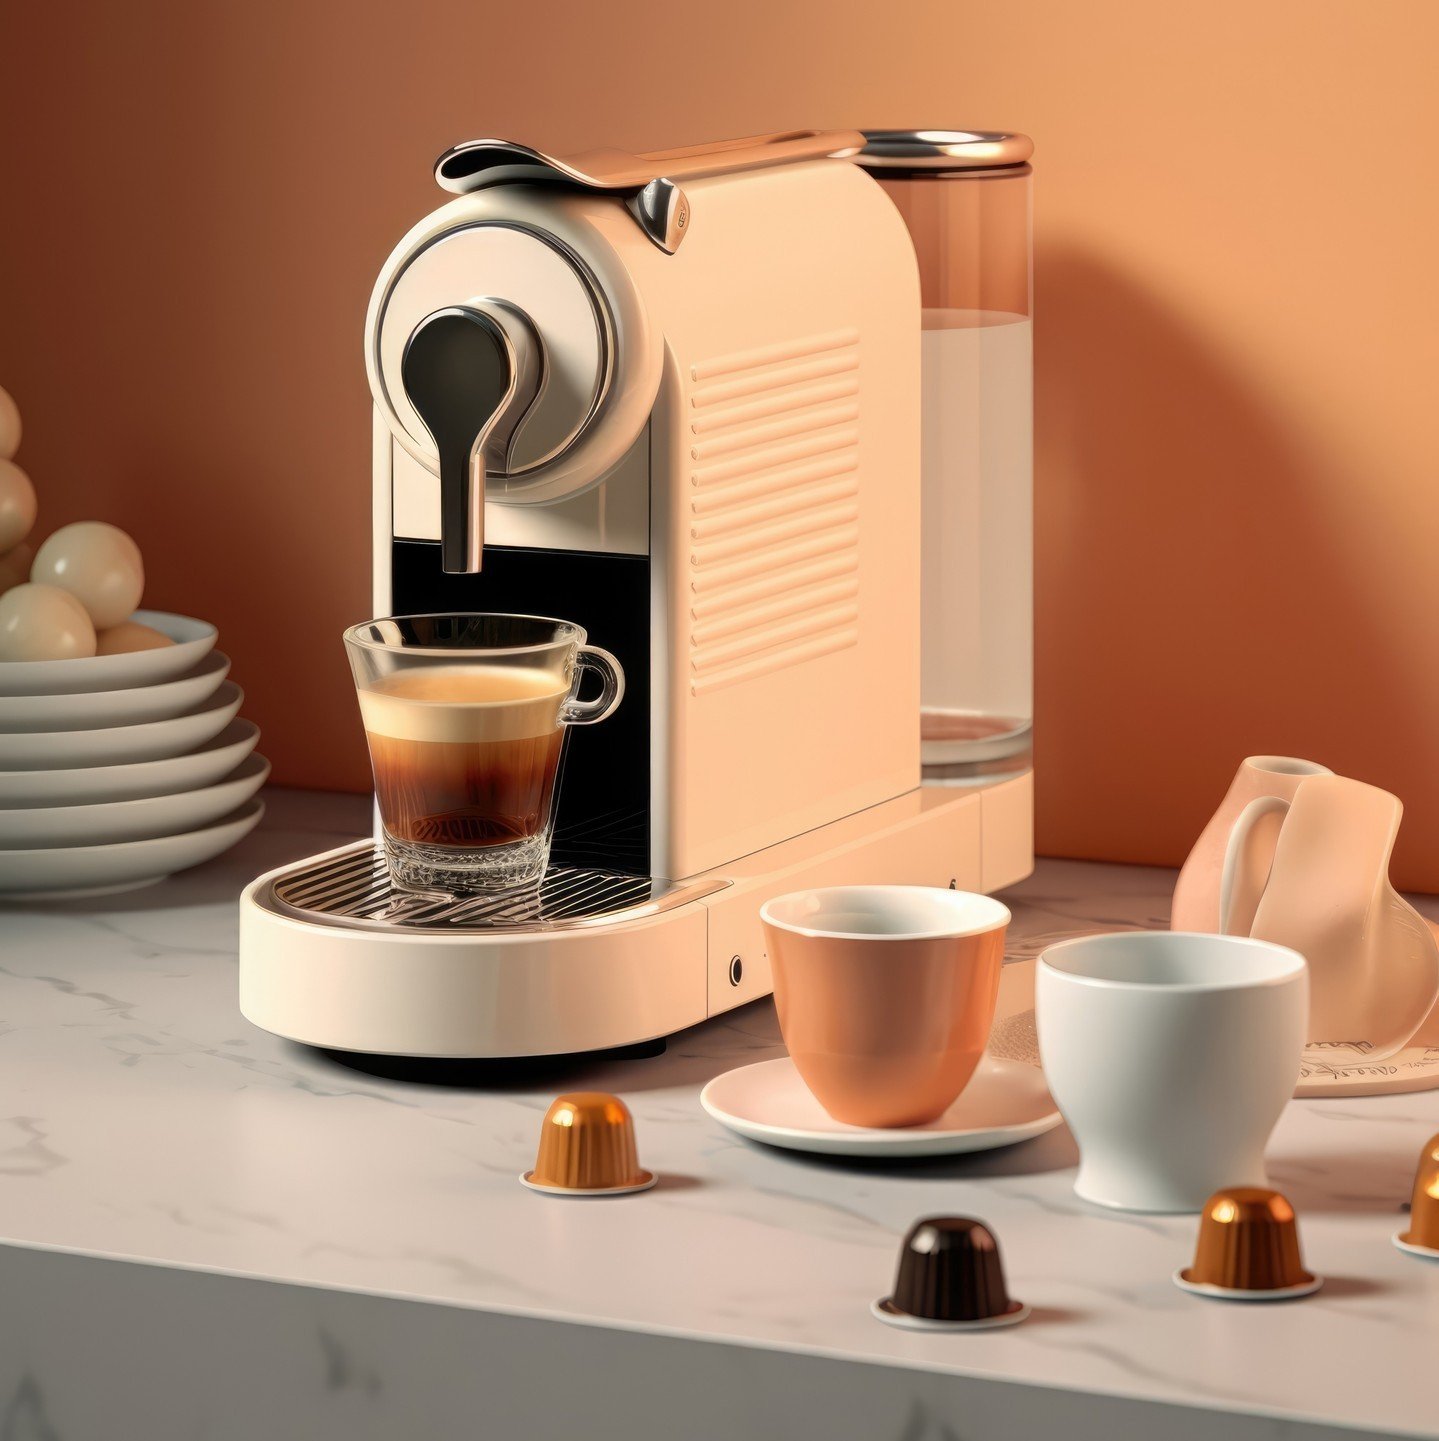 The success of Nespresso's marketing strategy! ☕️✨⁠
⁠
Once upon a time, Nespresso found themselves facing a unique marketing challenge. Their coffee machines and pods held a higher price point compared to the ordinary at-home coffee methods we all kn